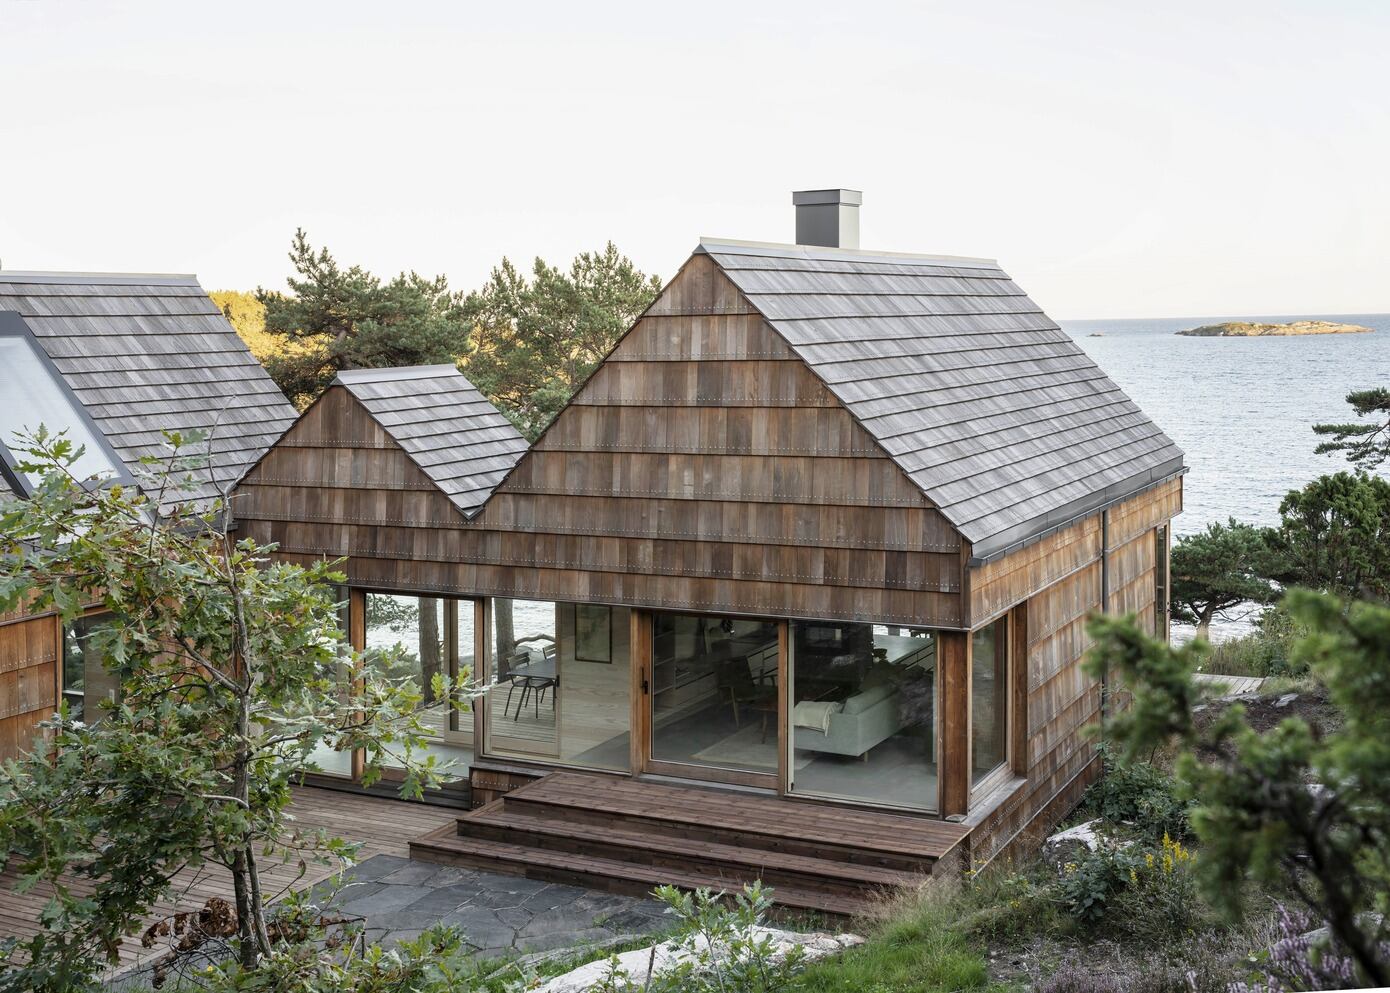 Saltviga House: A Norwegian Seaside Haven with a Twist